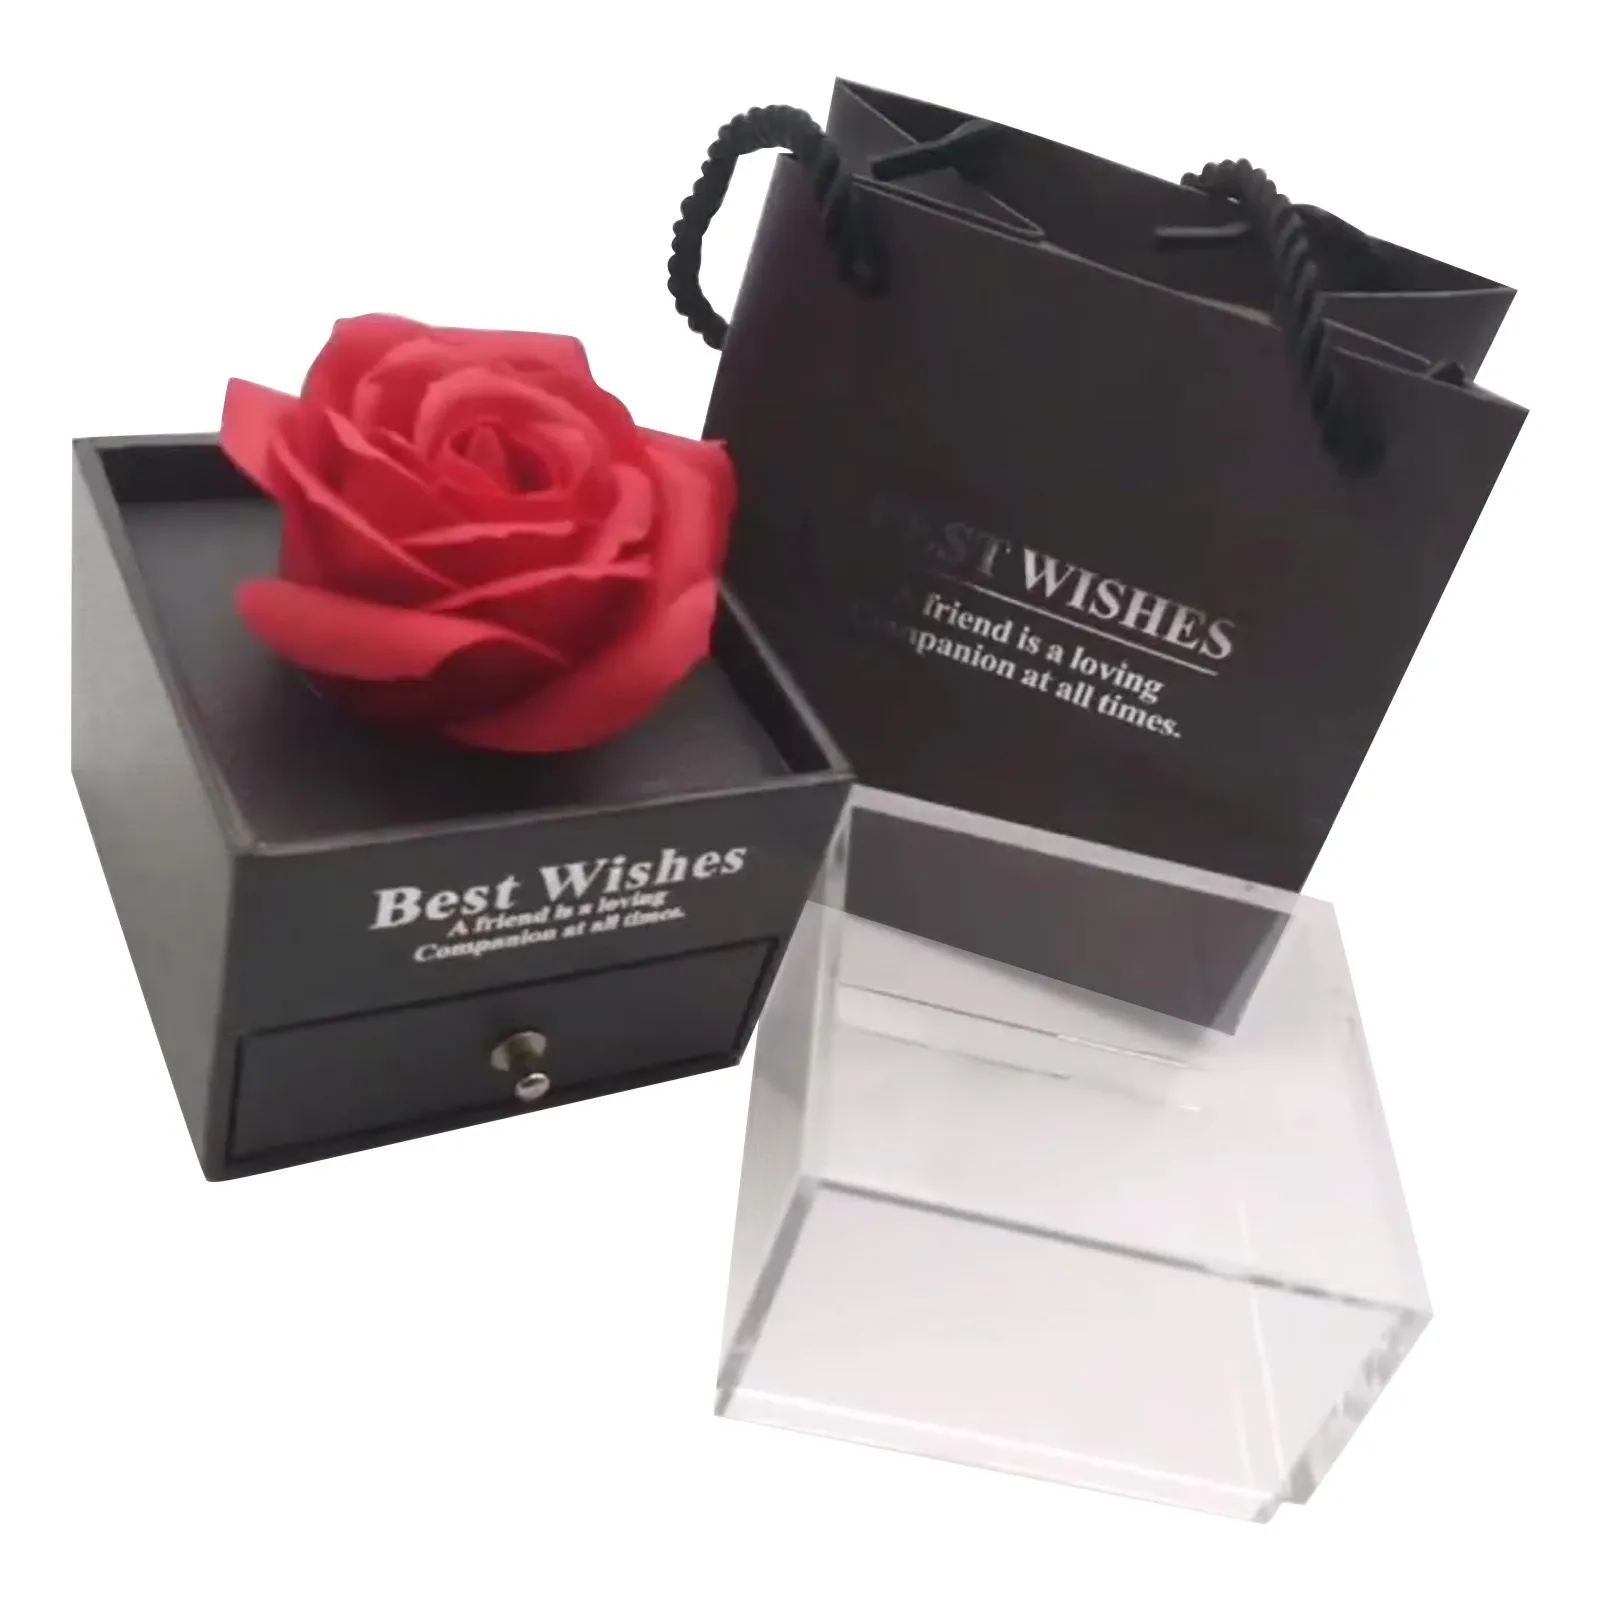 Sd3c71fa400c24420888f636dcd6a0234p Everlasting Flower Gift Box Rose Preservation Box Mother's Day Handmade Rose Gif